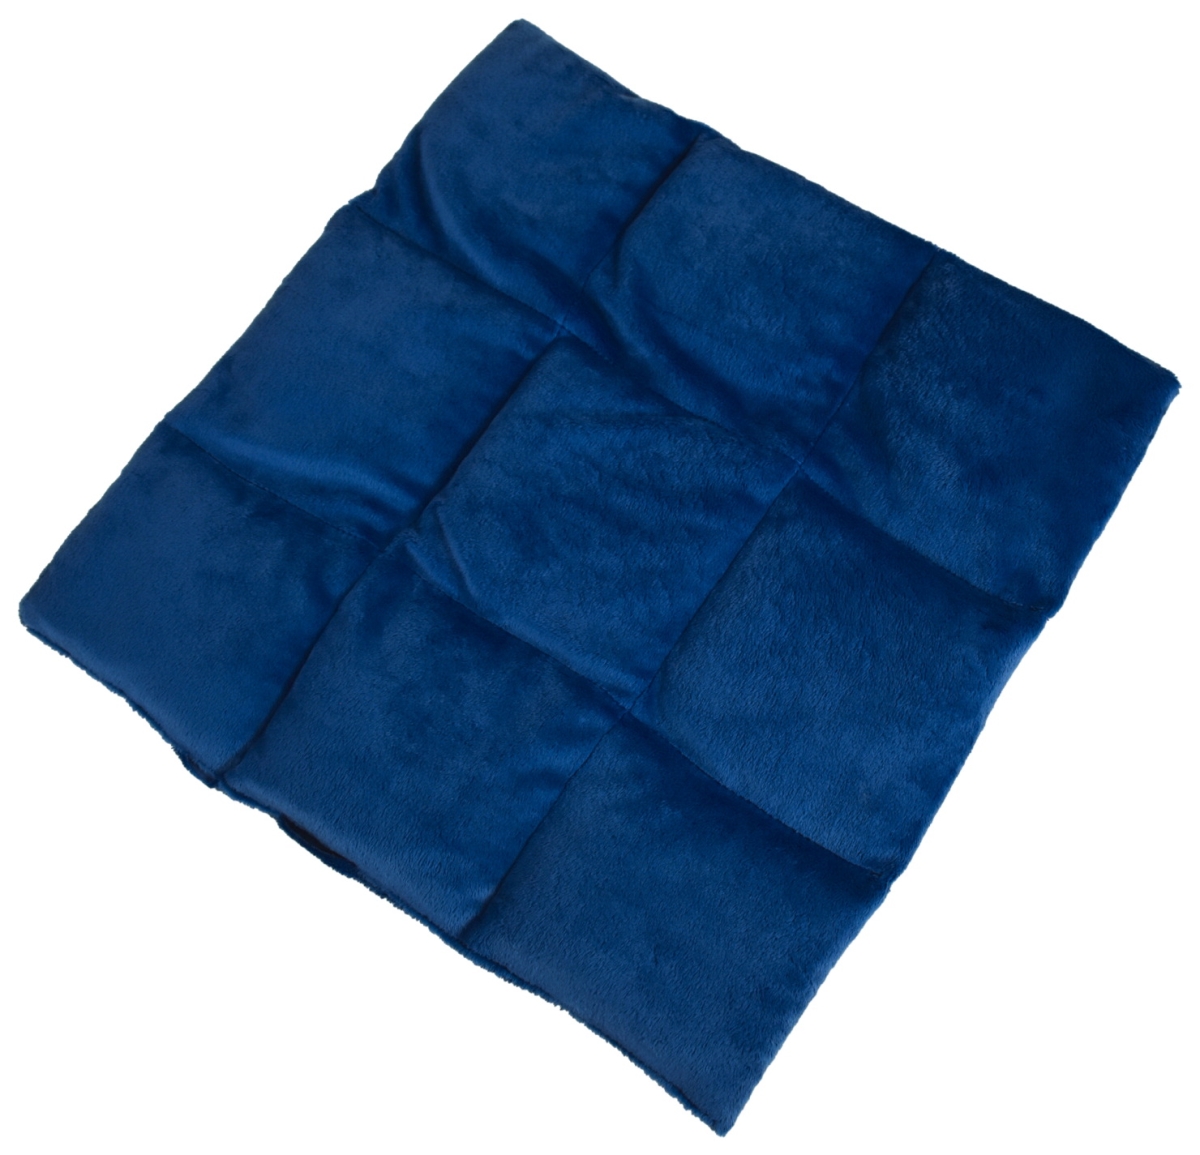 2005628 16 X 14 In. Weighted Lap Pad, Blue - 4 Lbs - Large